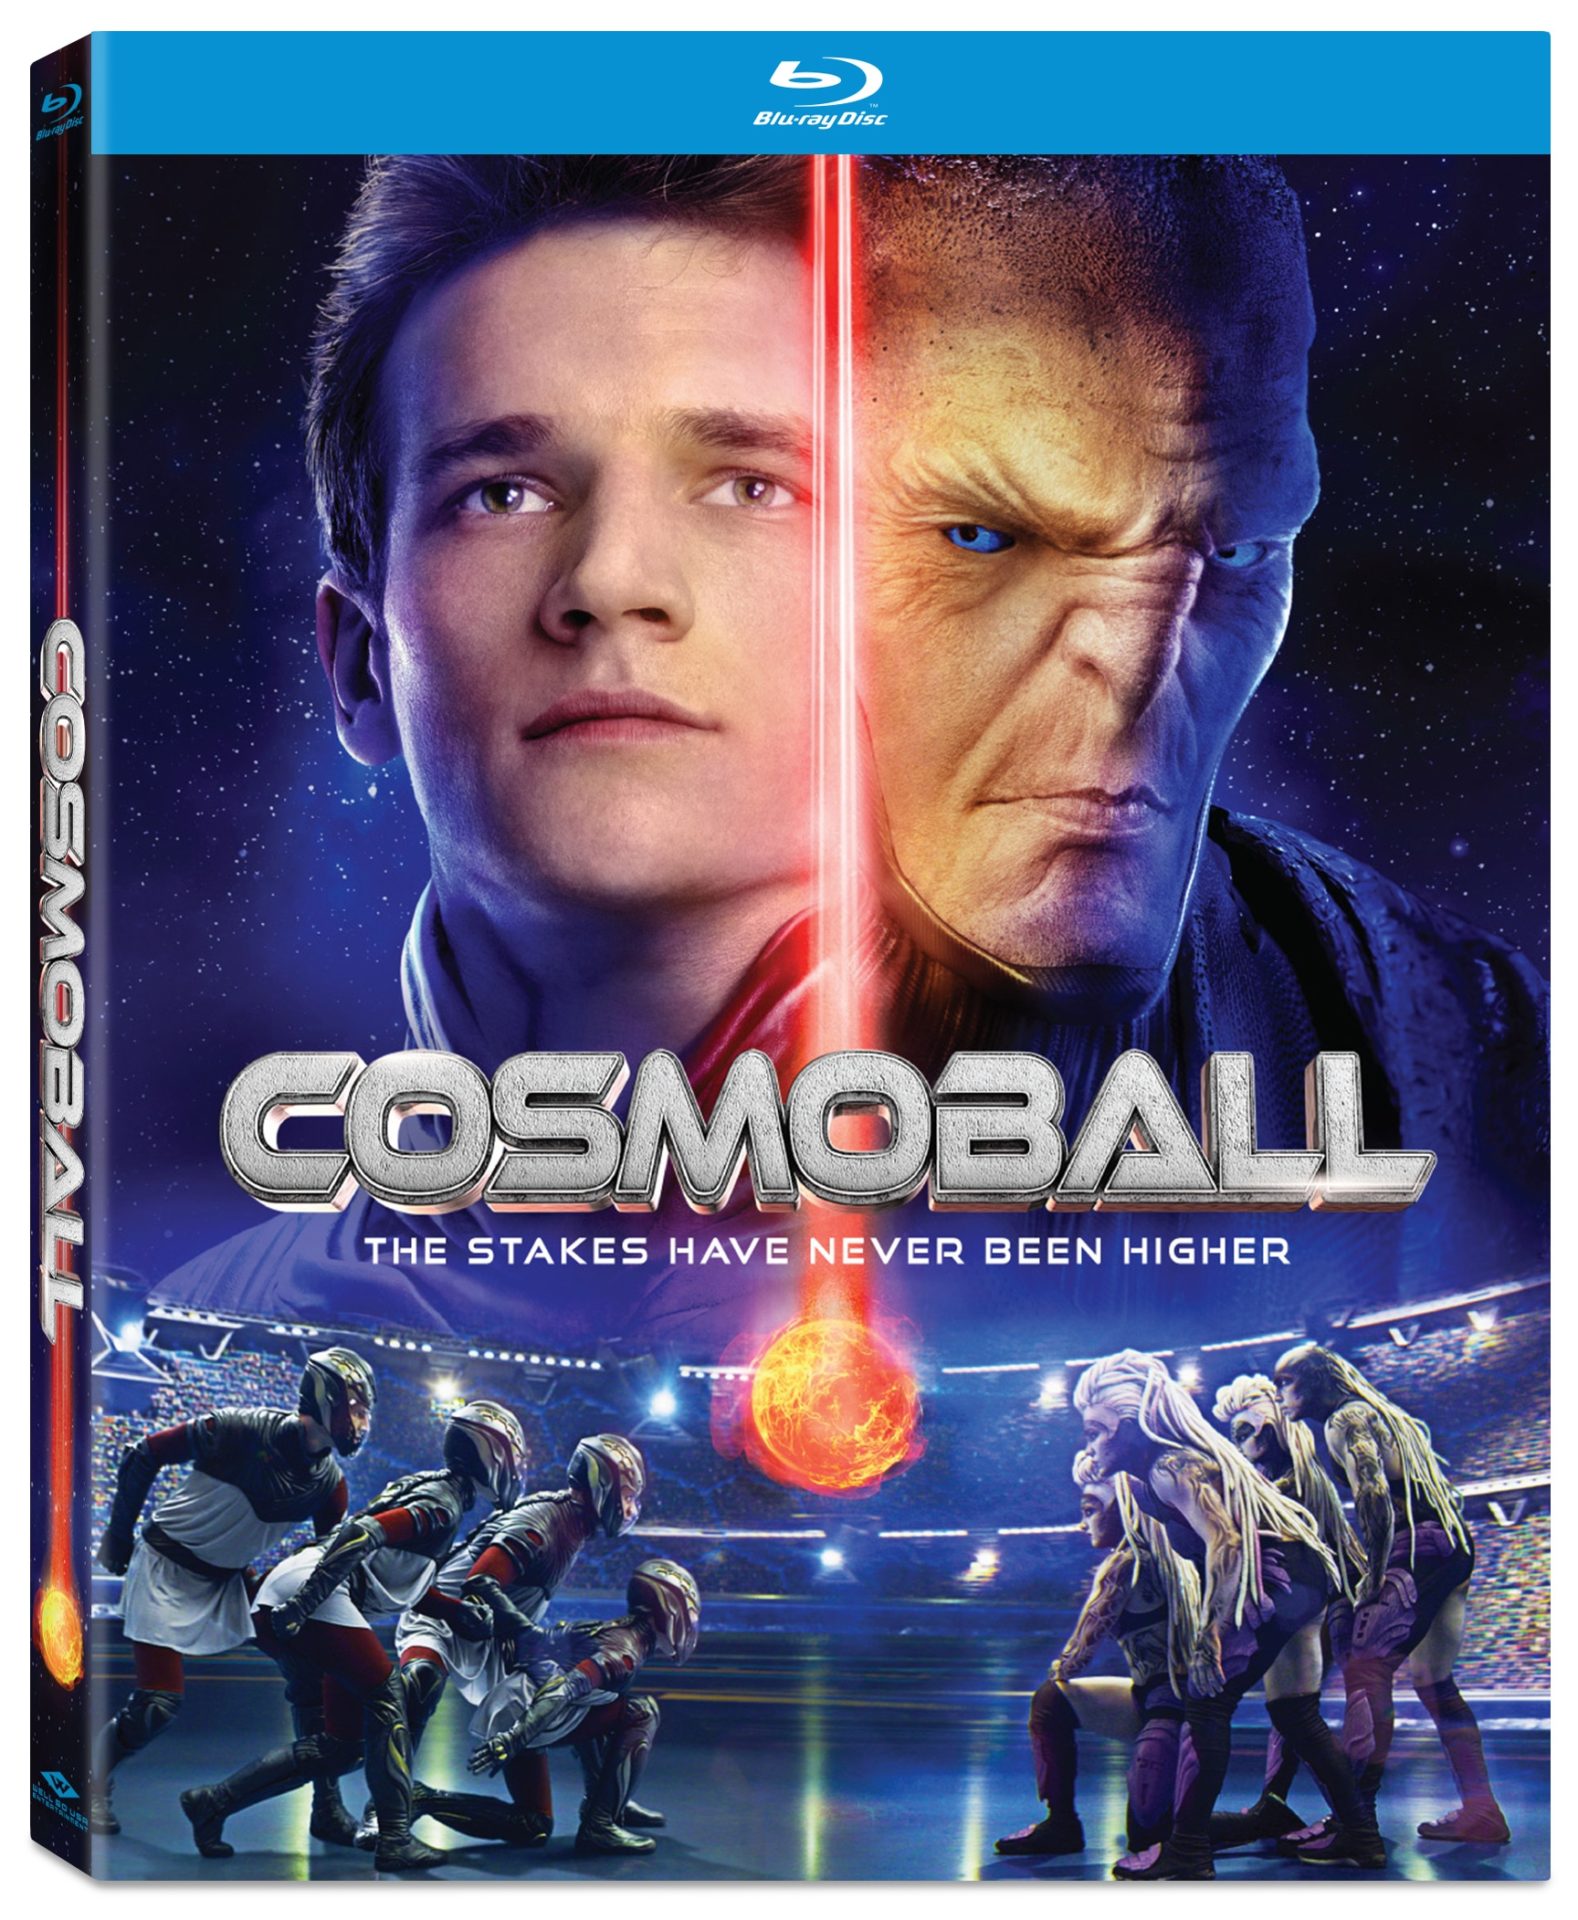 Cosmoball 2021 Movie Wallpapers